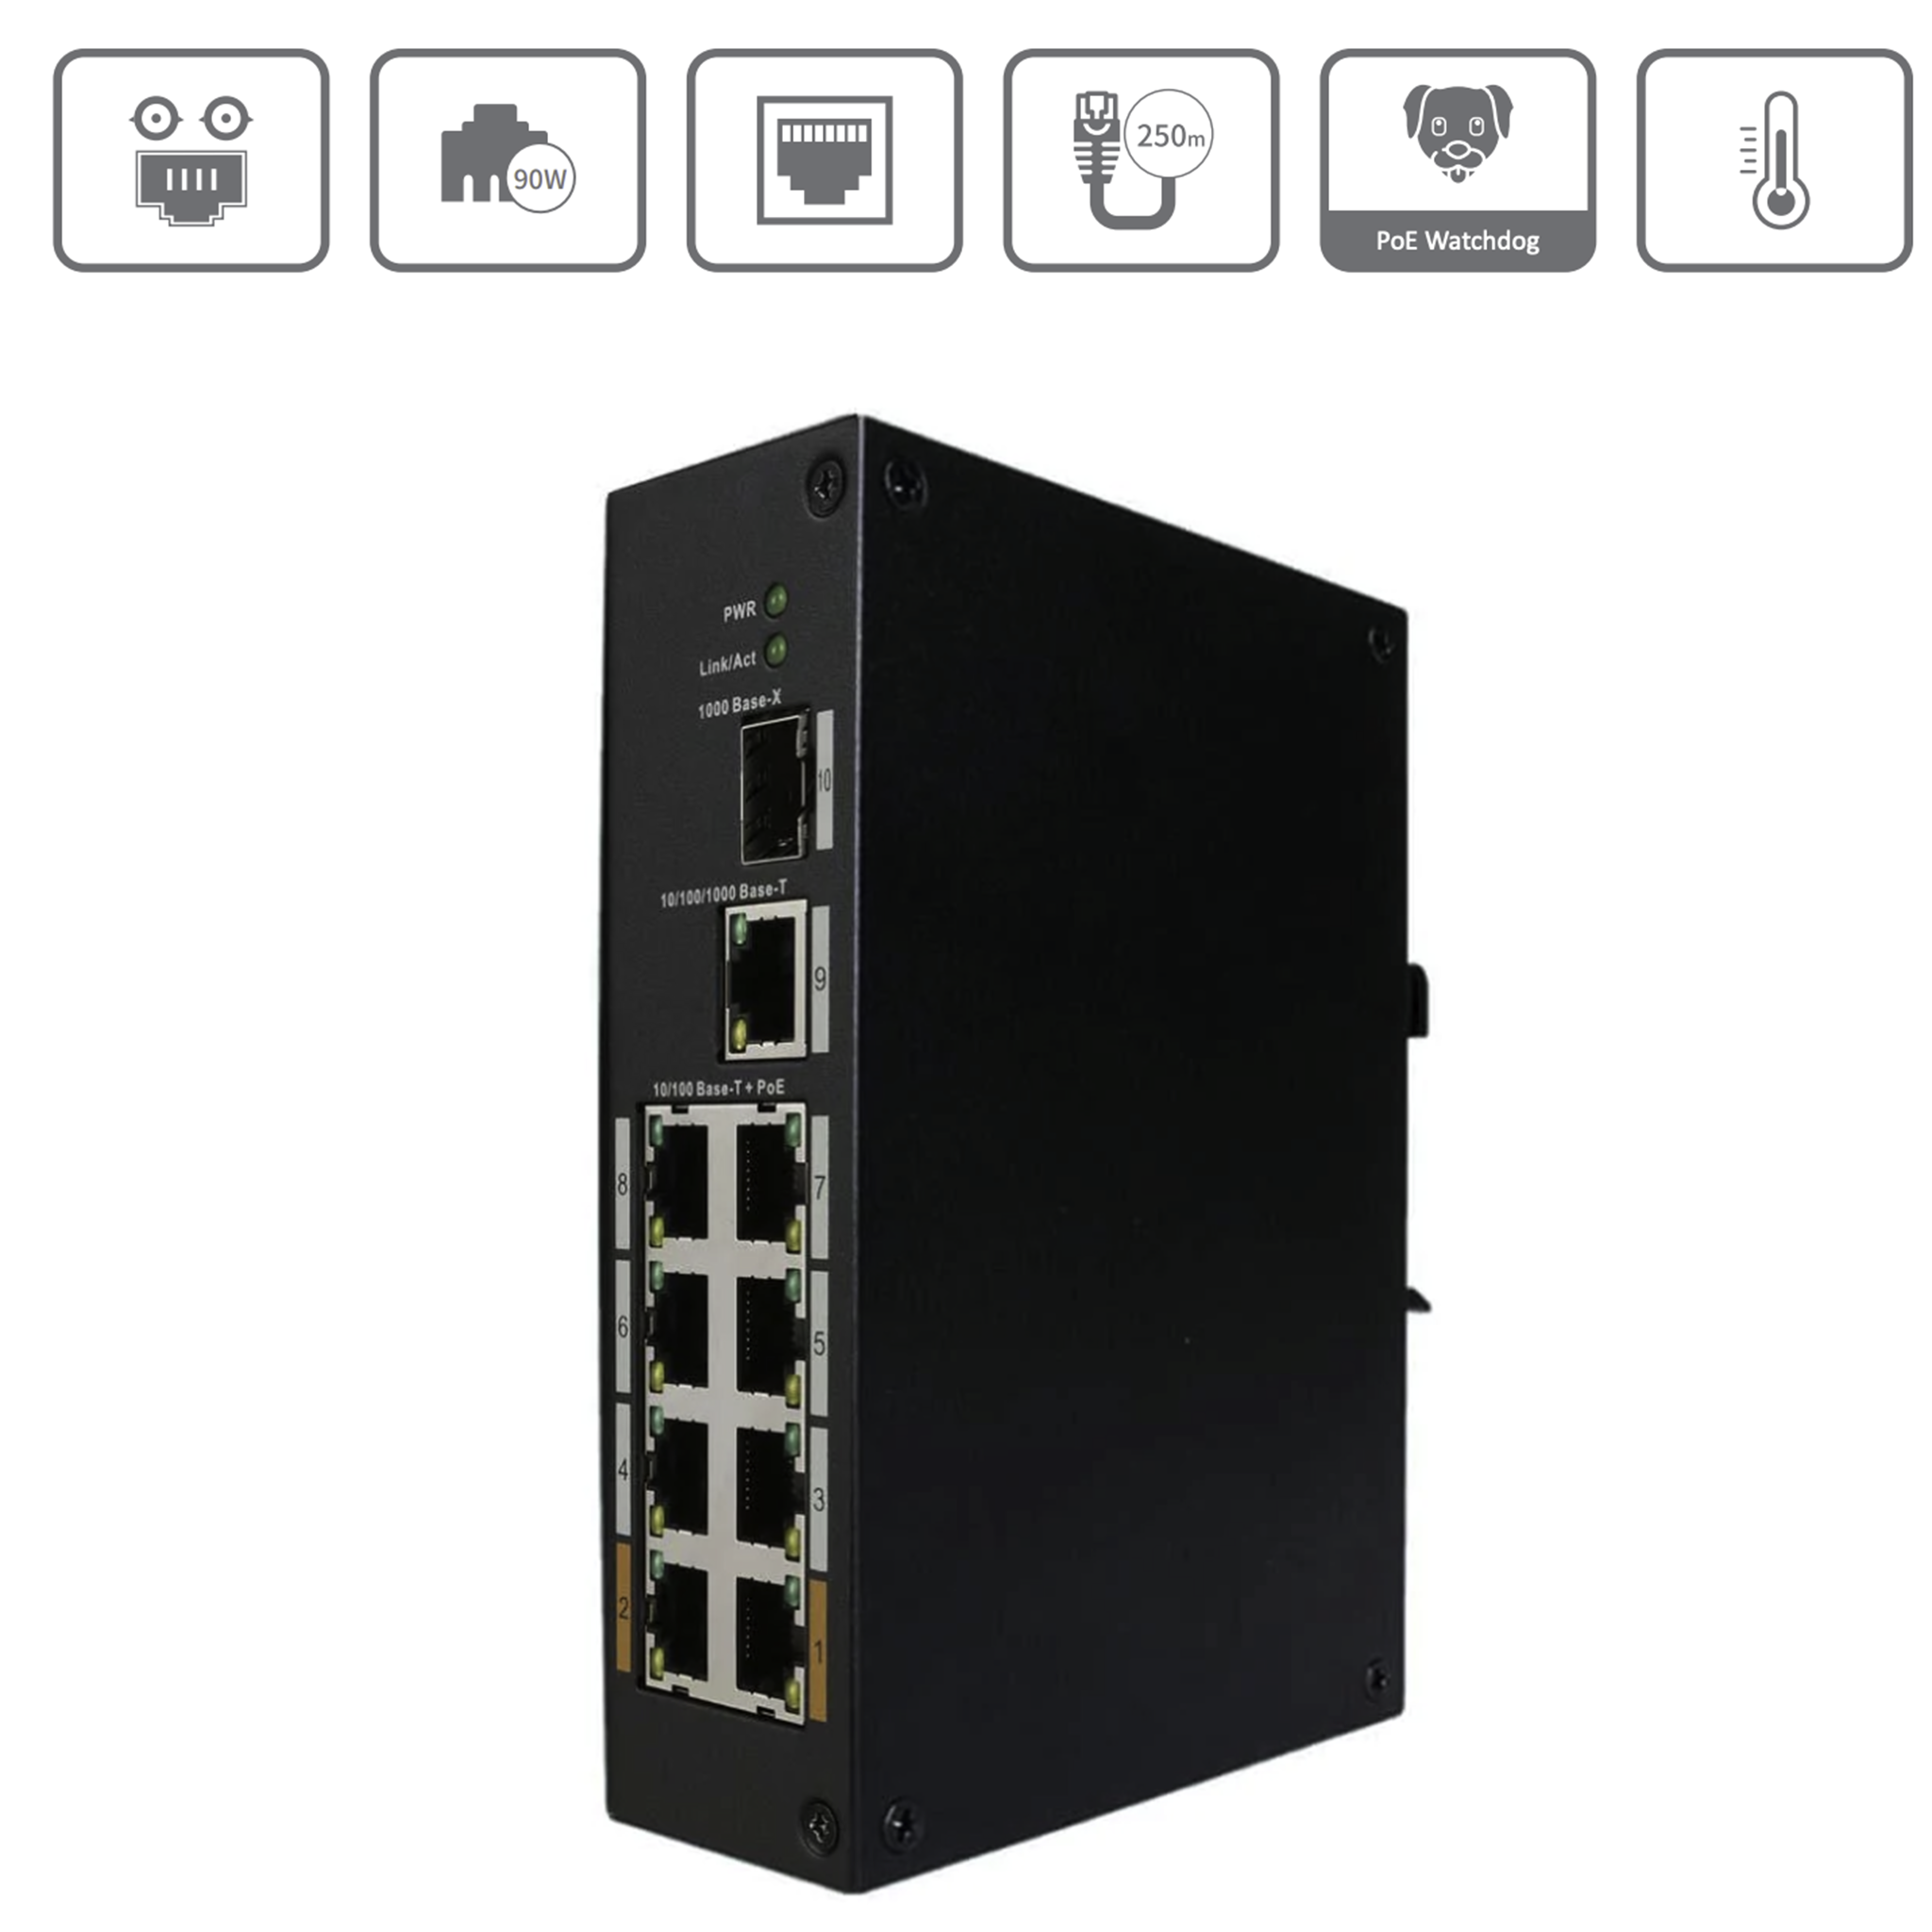 Camera PoE Switch, 9 and 24 port GB PoE Switches - WifiSoft